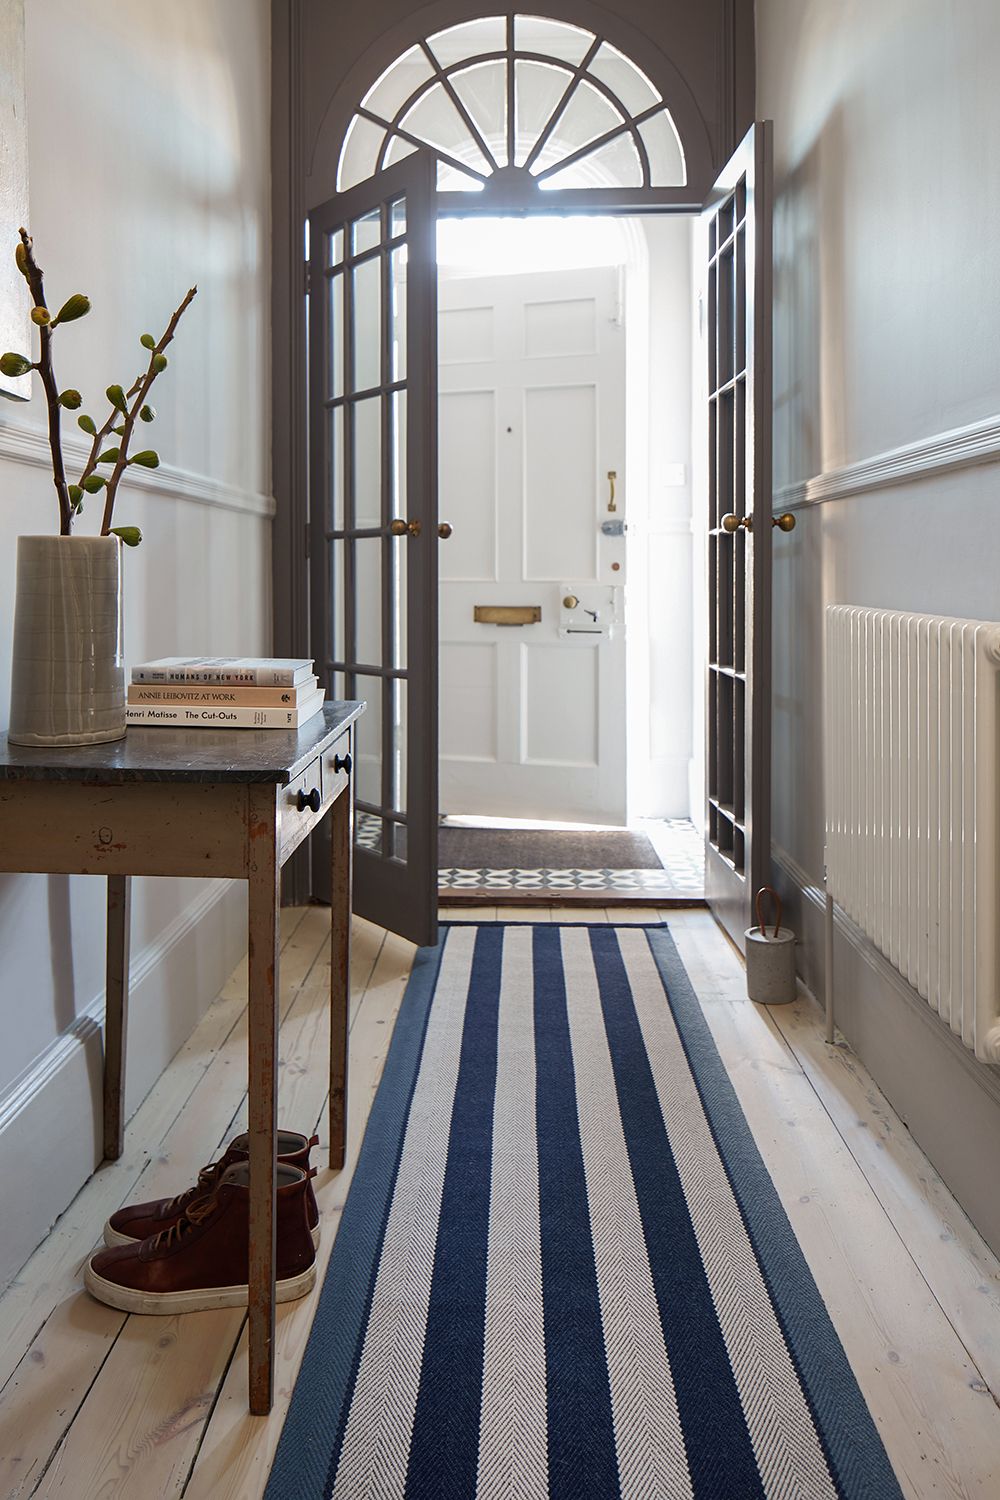 Hallway Rugs 10 Ideas To Add Style, Entrance Rugs For Hardwood Floors